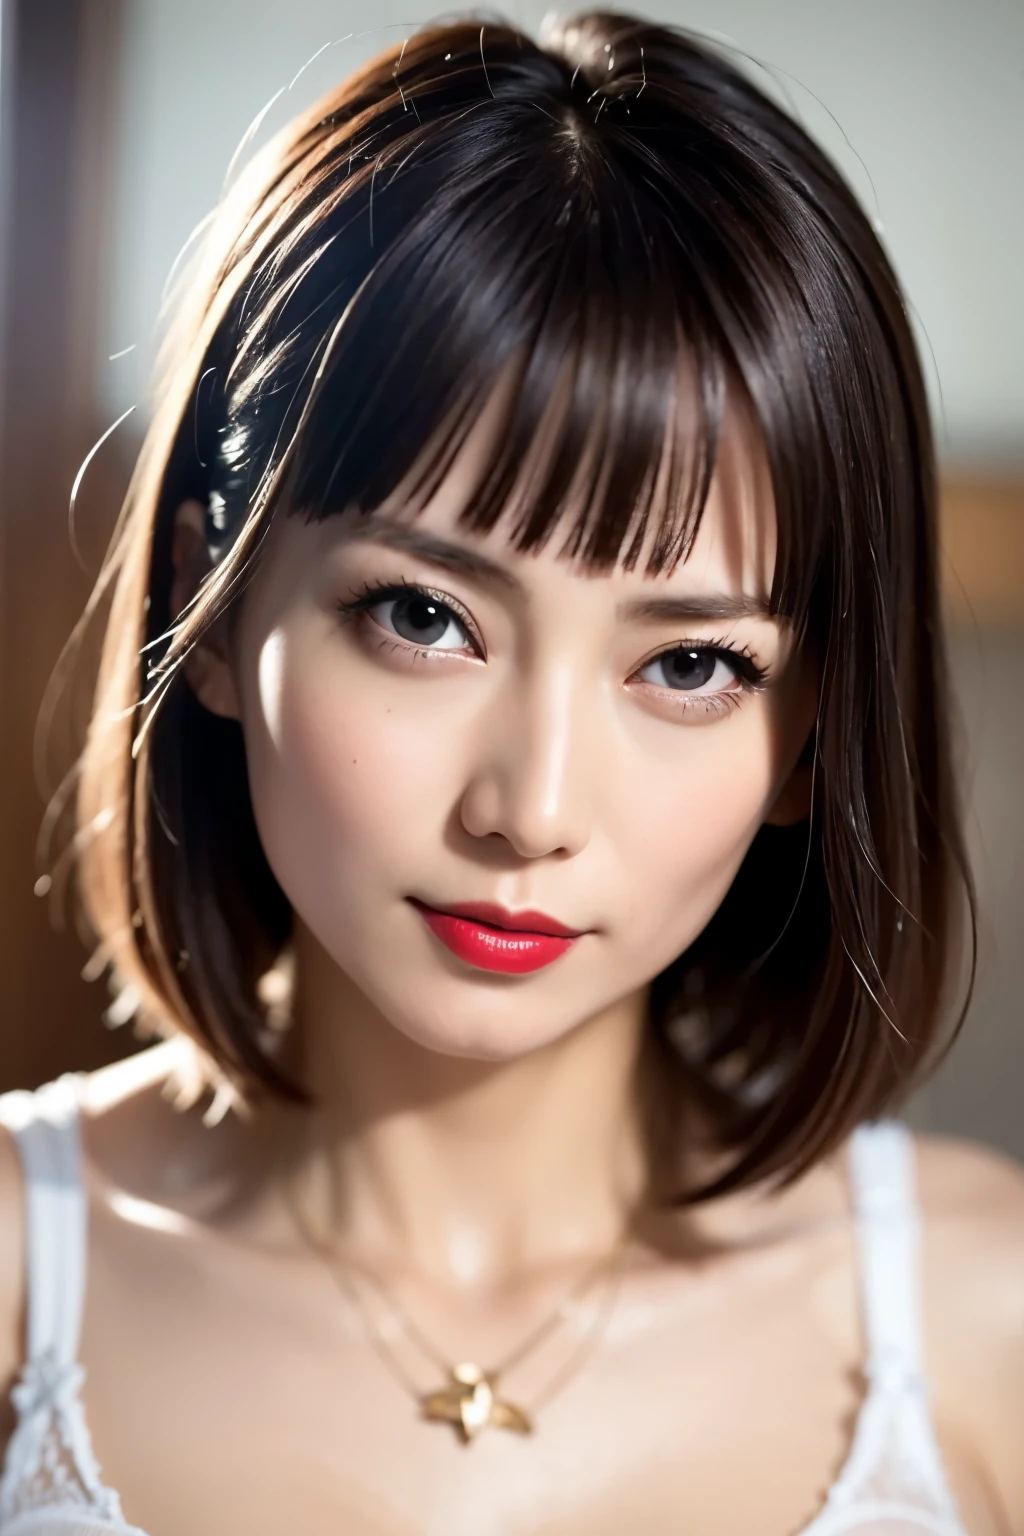 Beautiful Japanese Women, 1 person, Very cute and slim, Excellent style, 8K images, super high quality, Very delicate face, Skin and Hair, Red lipstick, short hair, straggling hair, Gradient Hair, blonde, Very cute Japanese cut face, Eyes and nose are clearly visible, Kind eyes, lingerie, Simple Background, Looking at the audience